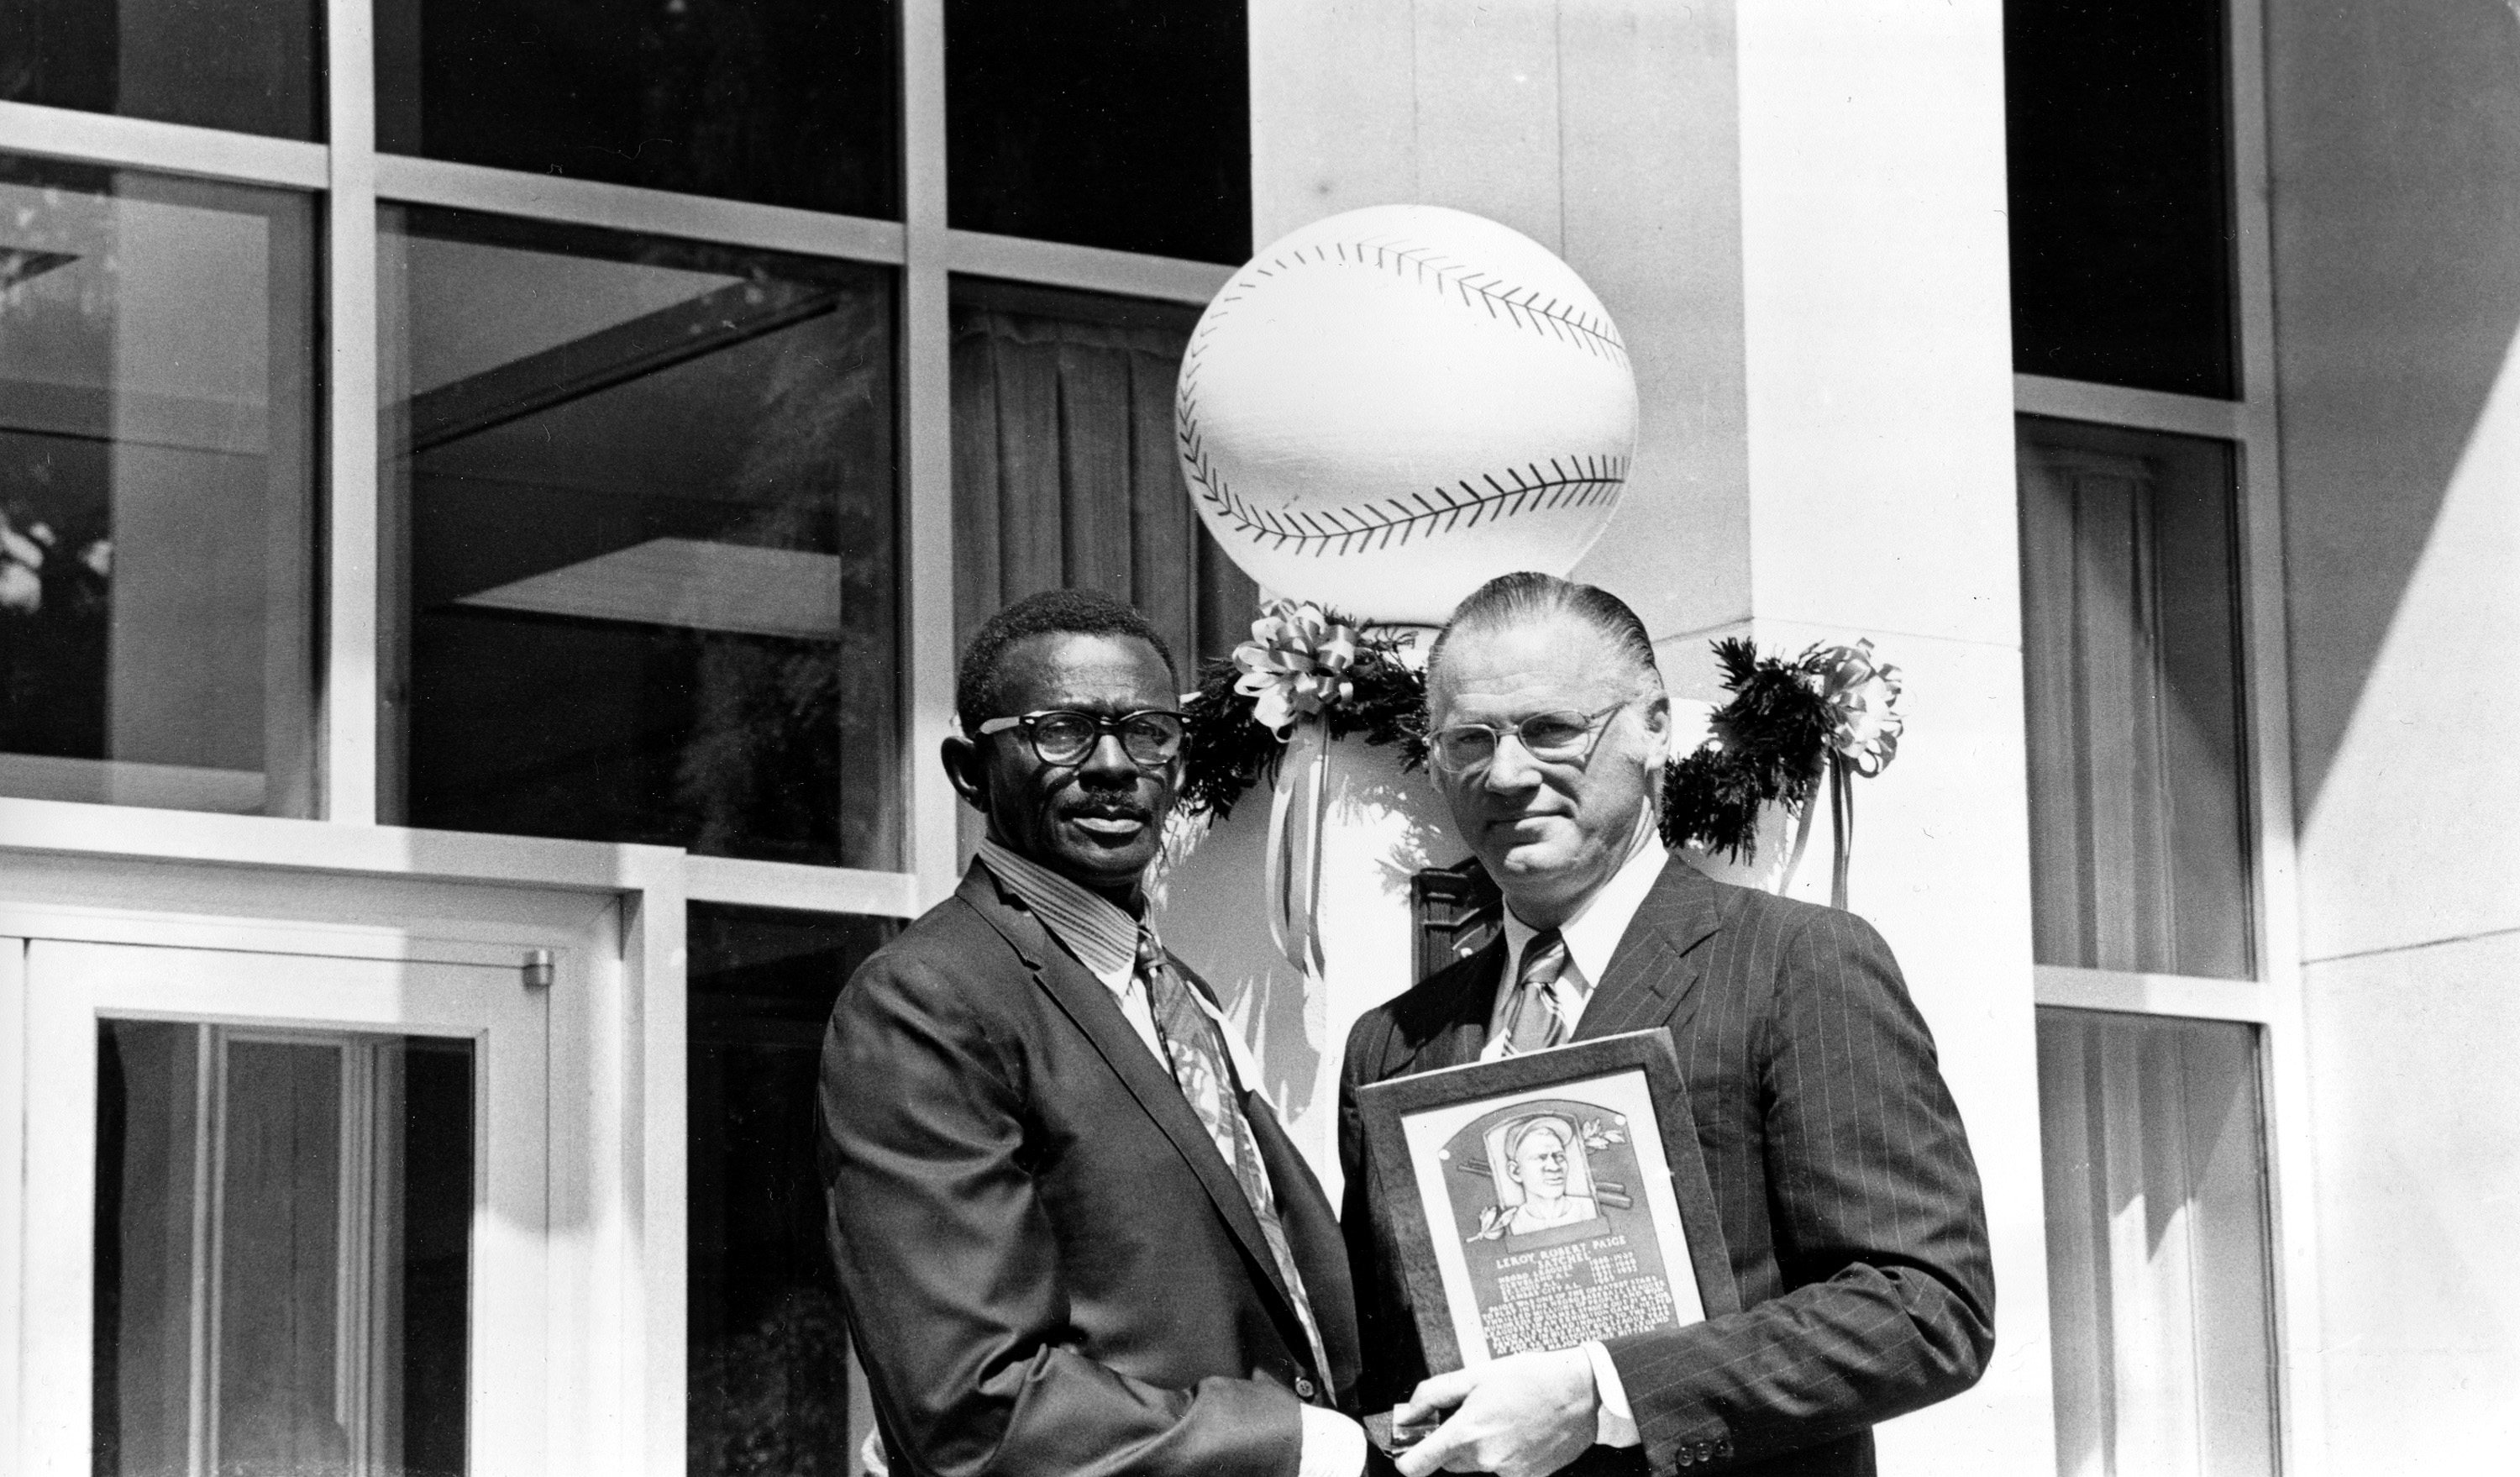 Satchel Paige, left, receives a plaque designating him as Member of the Baseball Hall of Fame from Baseball Commissioner Bowie Kuhn at the Hall of Fame Building in Cooperstown, NY on Aug. 9, 1971.